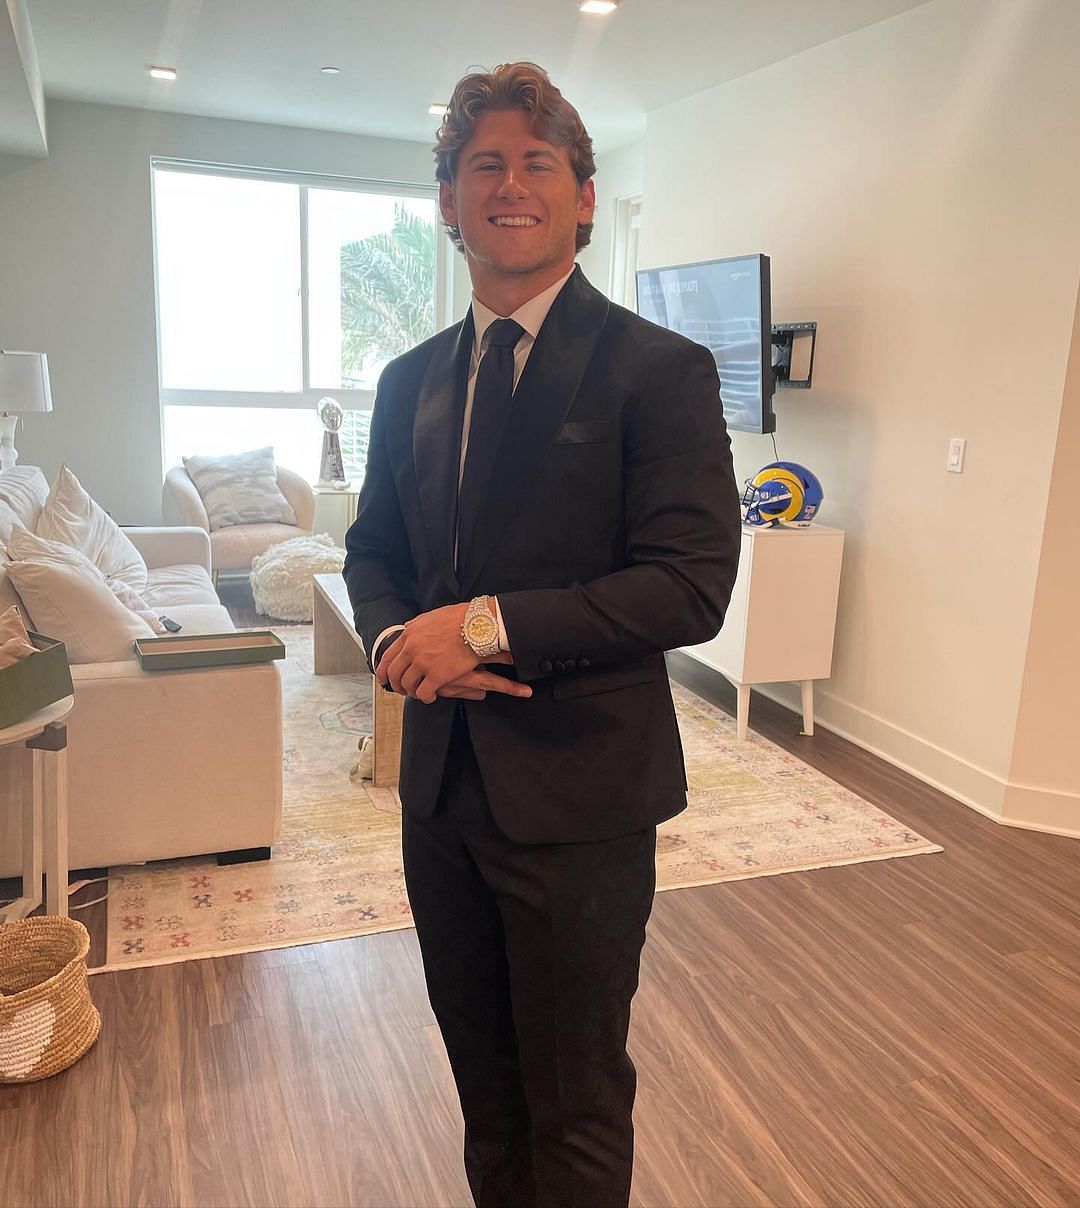 Jake Funk posing in a suit and stylish watch